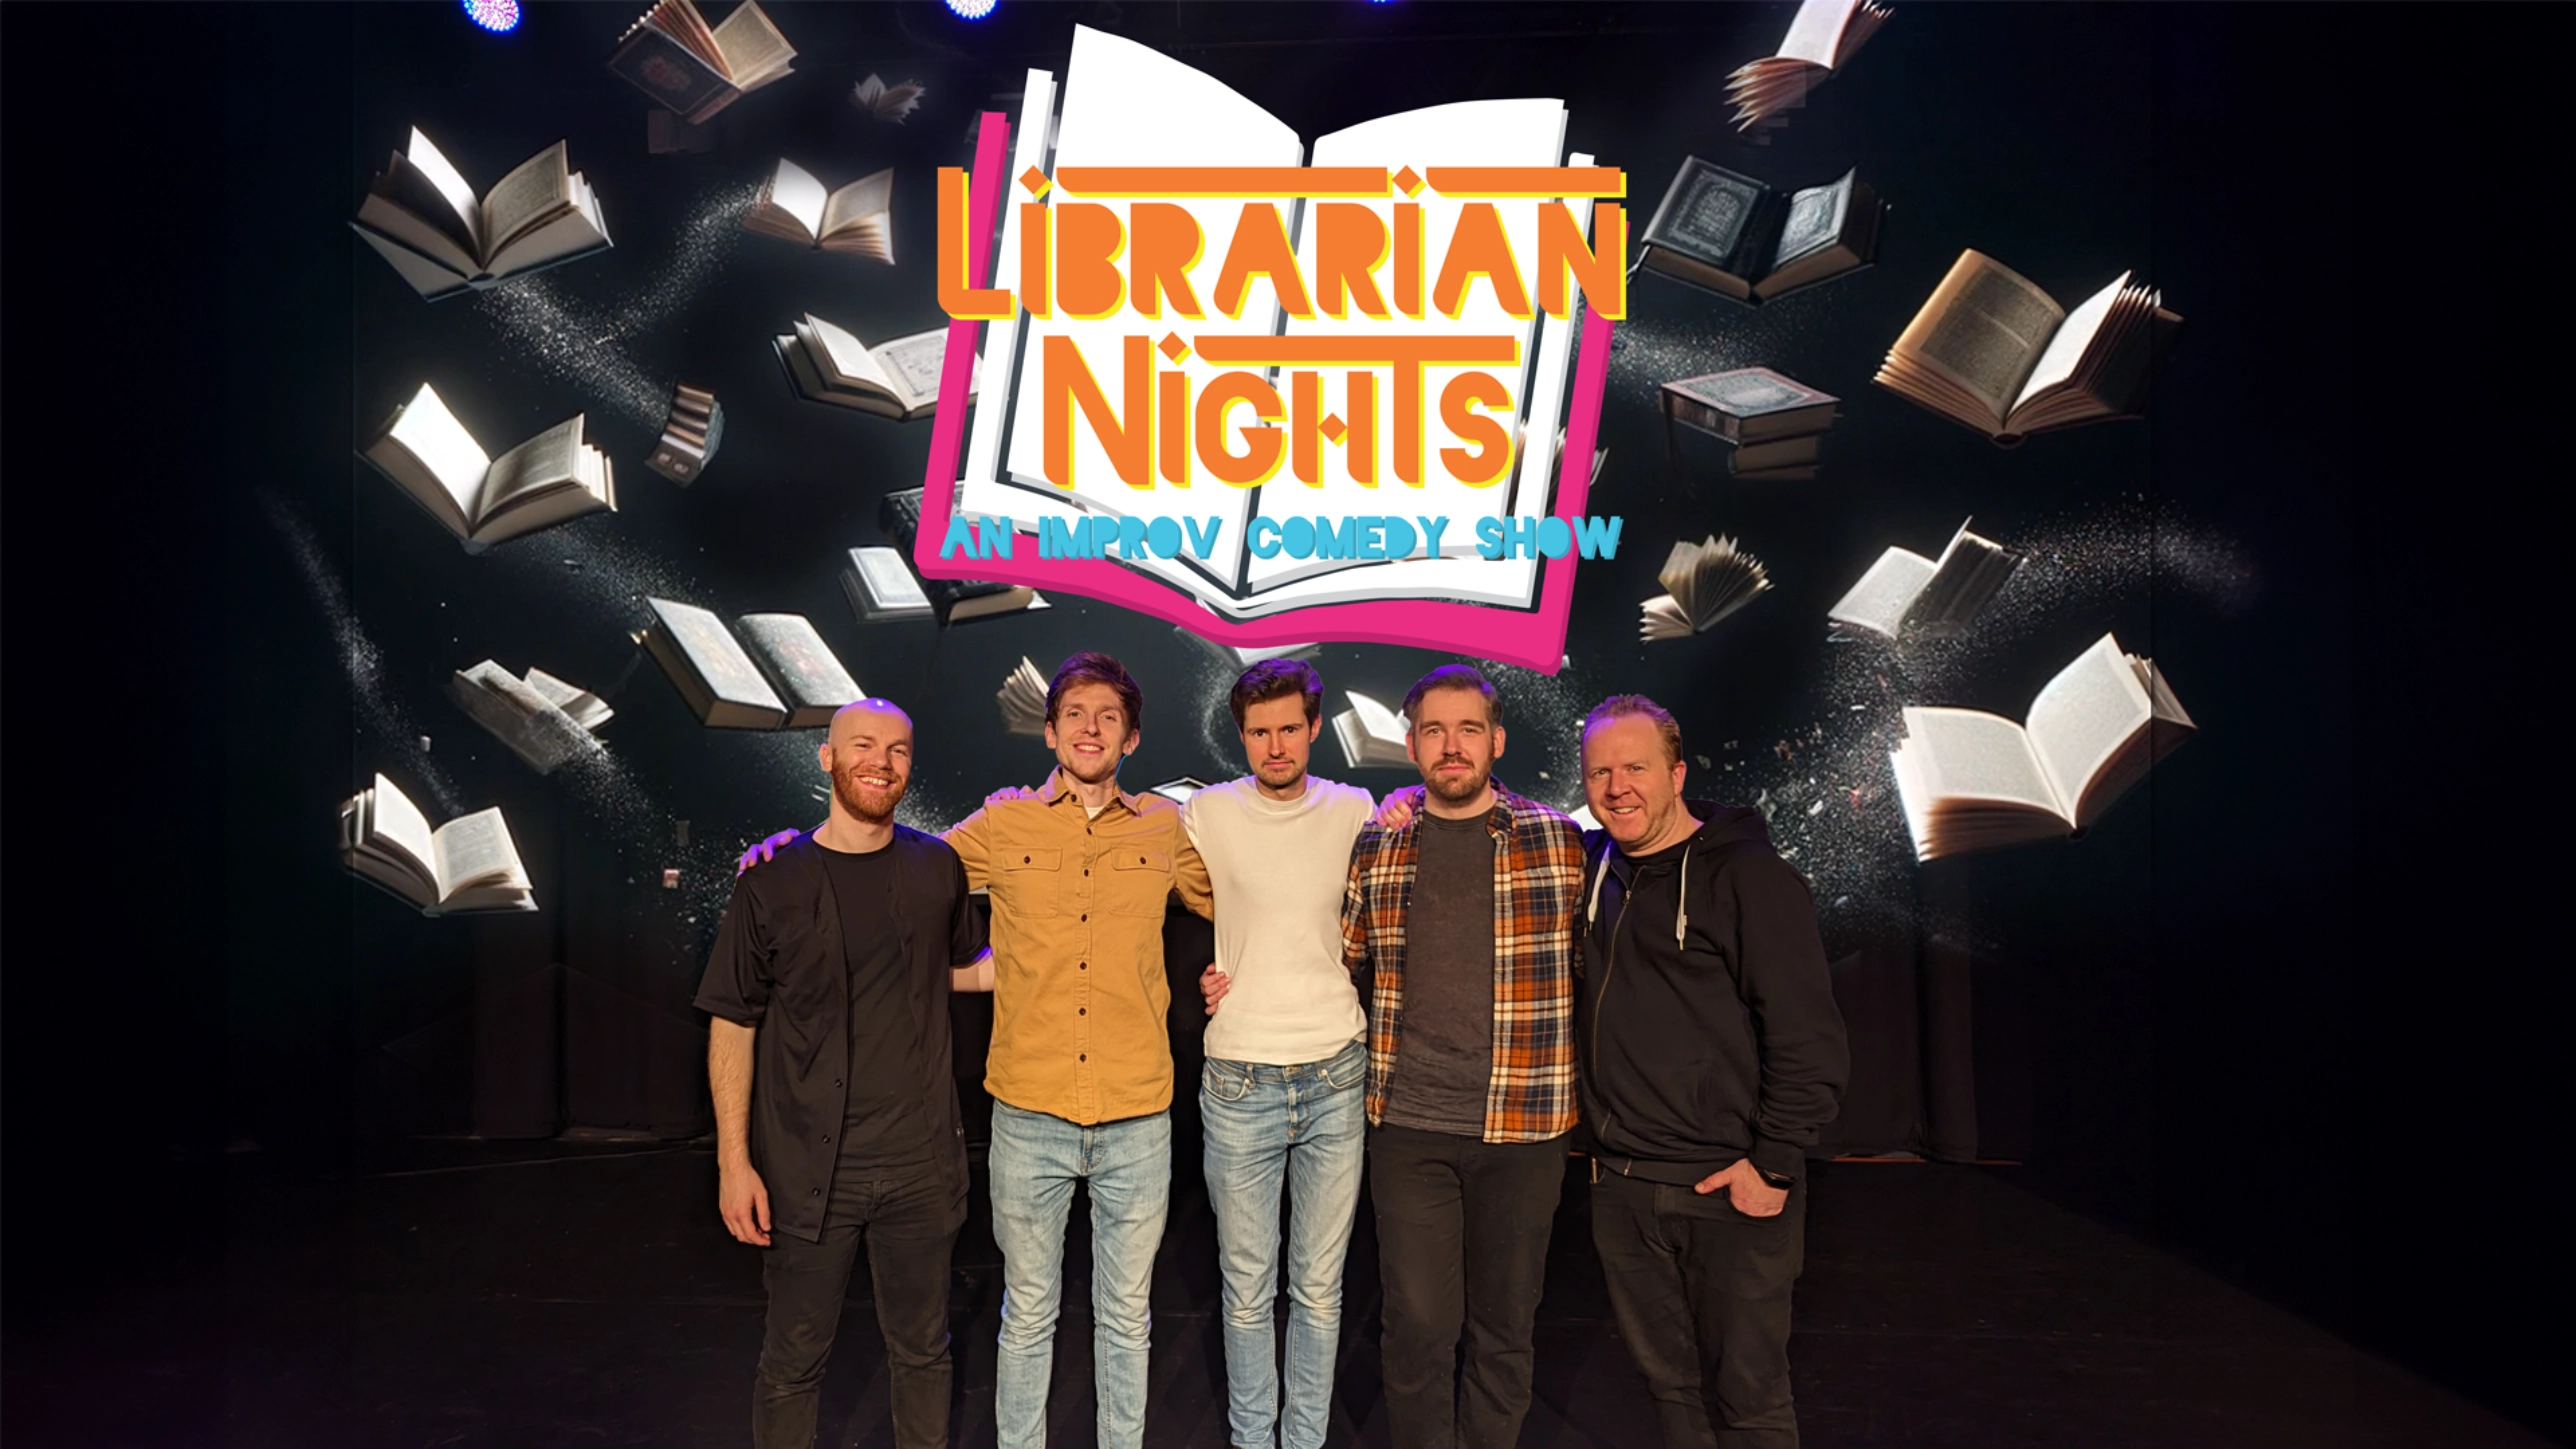 Librarian Nights: An Improv Comedy Show